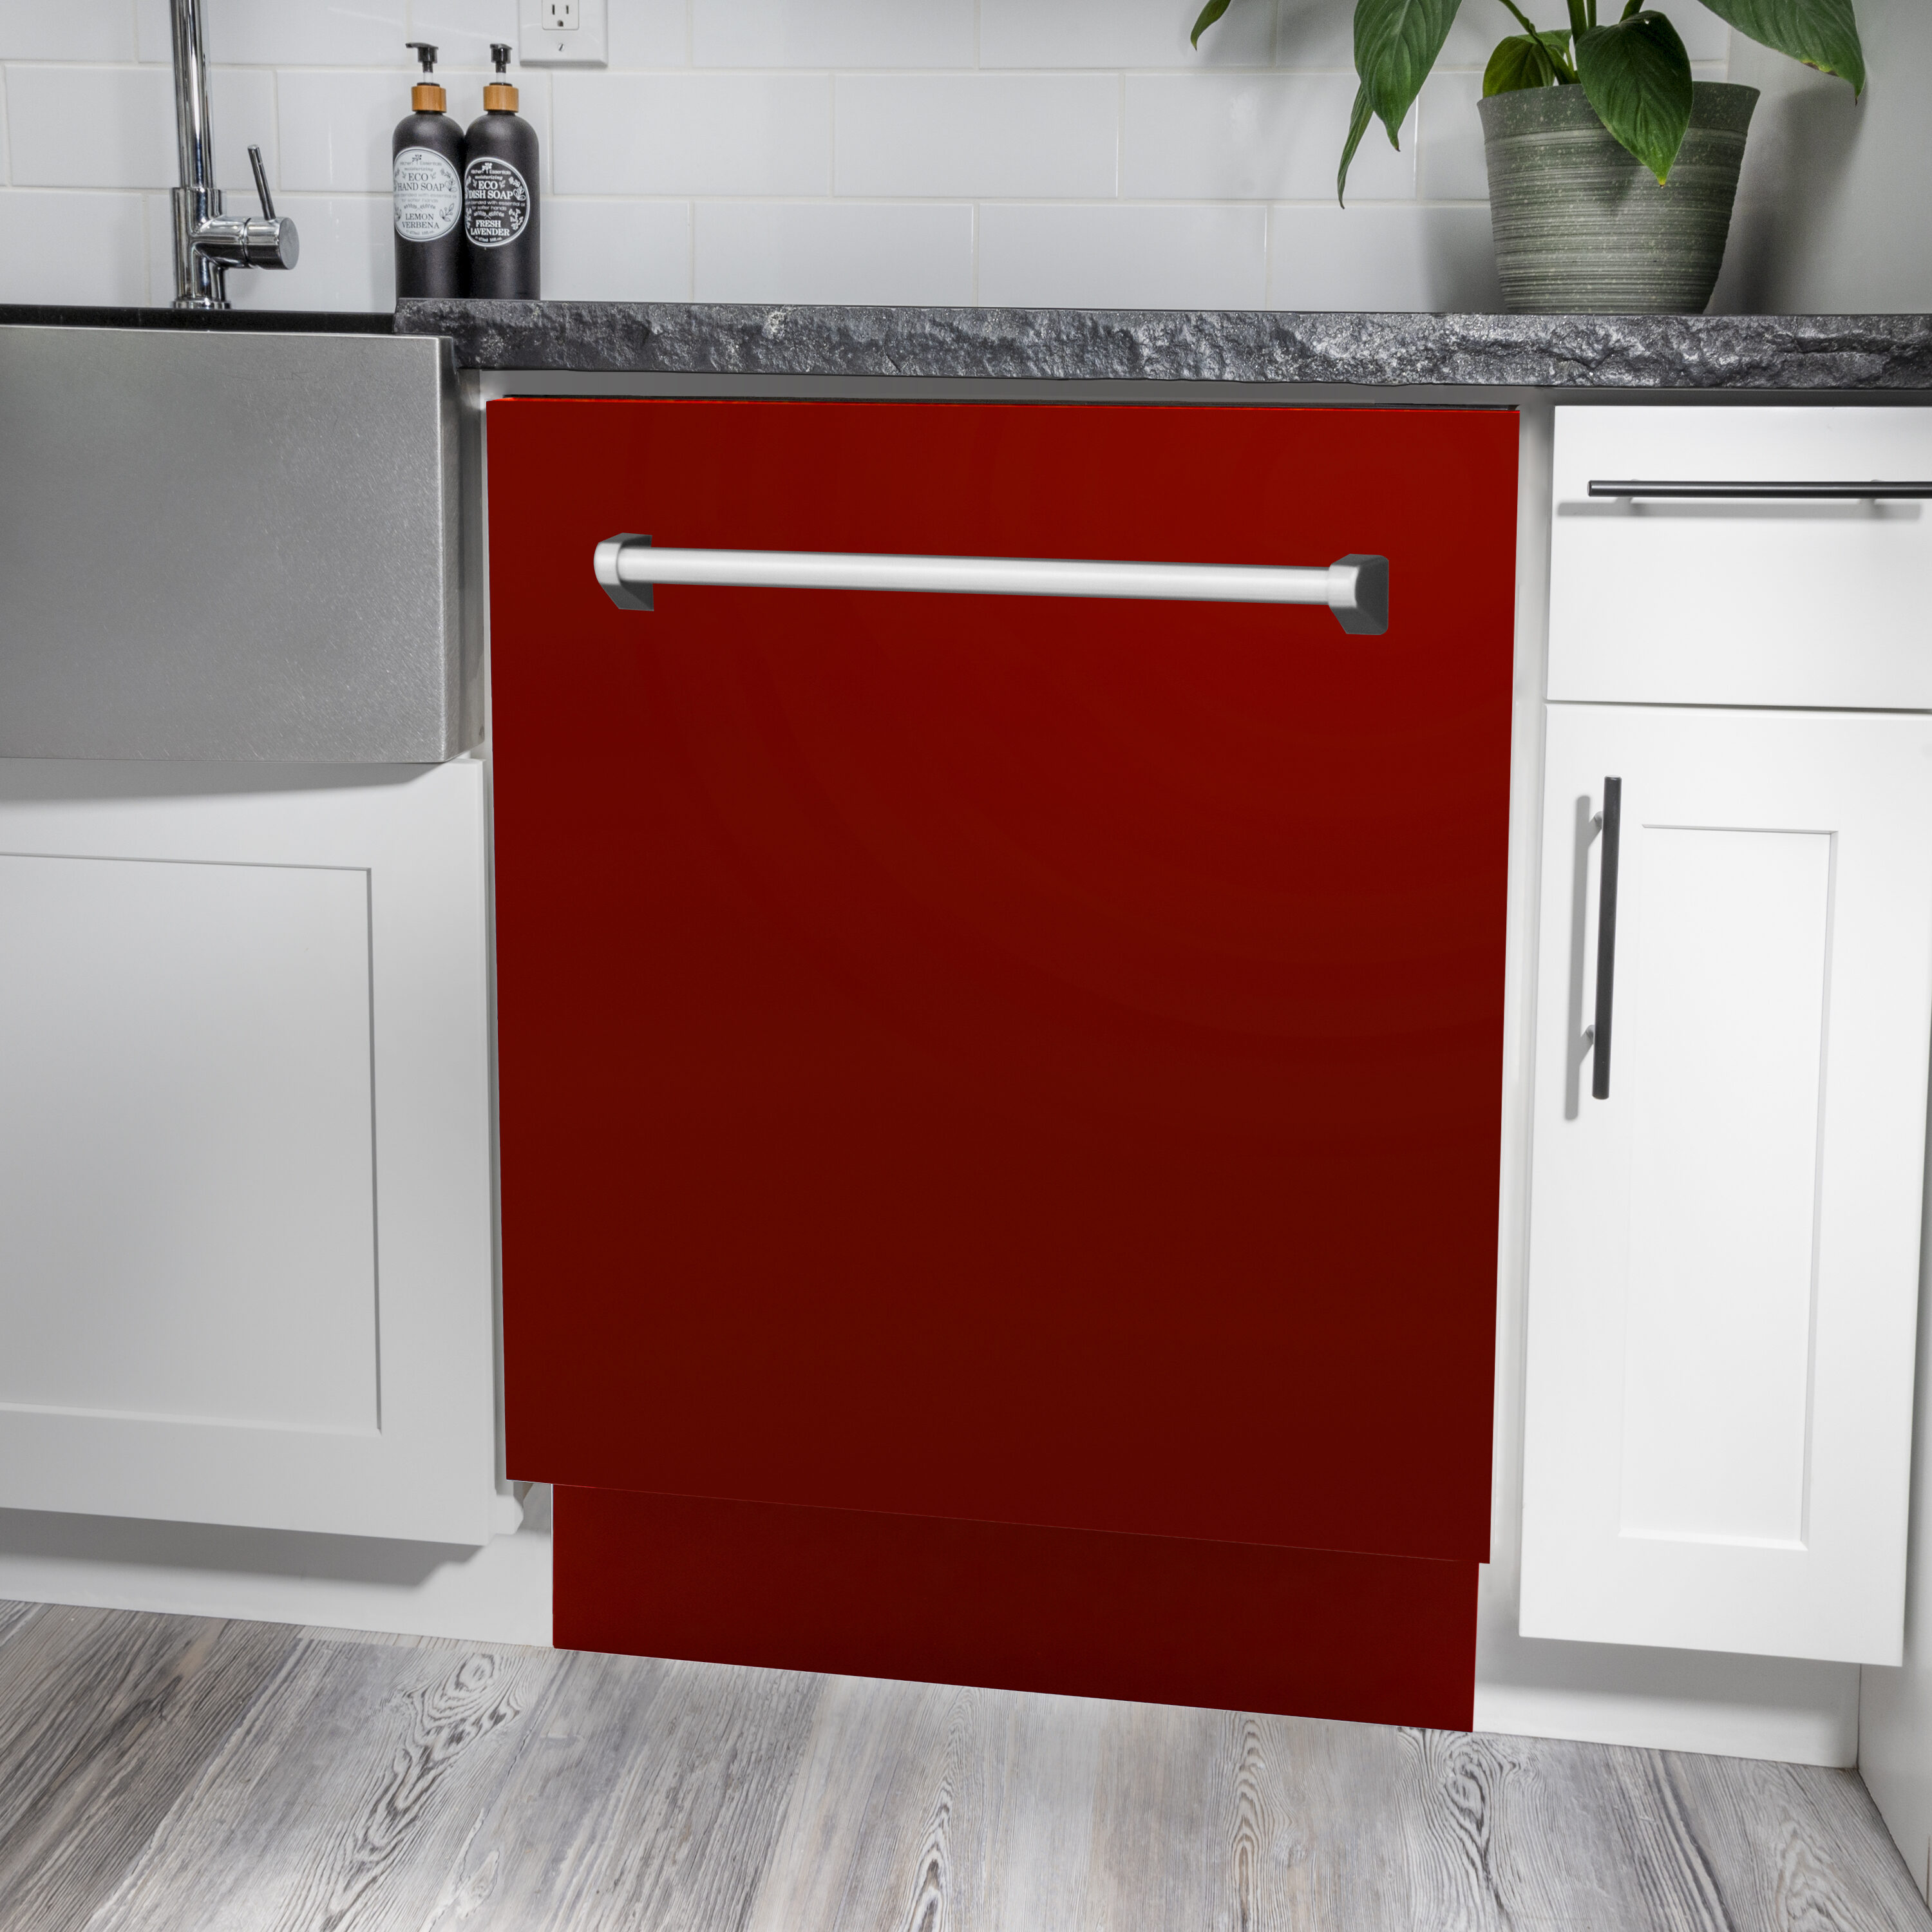 Studiet Fodgænger Uenighed ZLINE KITCHEN & BATH Tallac Top Control 24-in Built-In Dishwasher with  third rack (Stainless Steel Tub with Red Gloss Panel) ENERGY STAR, 51-dBA  in the Built-In Dishwashers department at Lowes.com